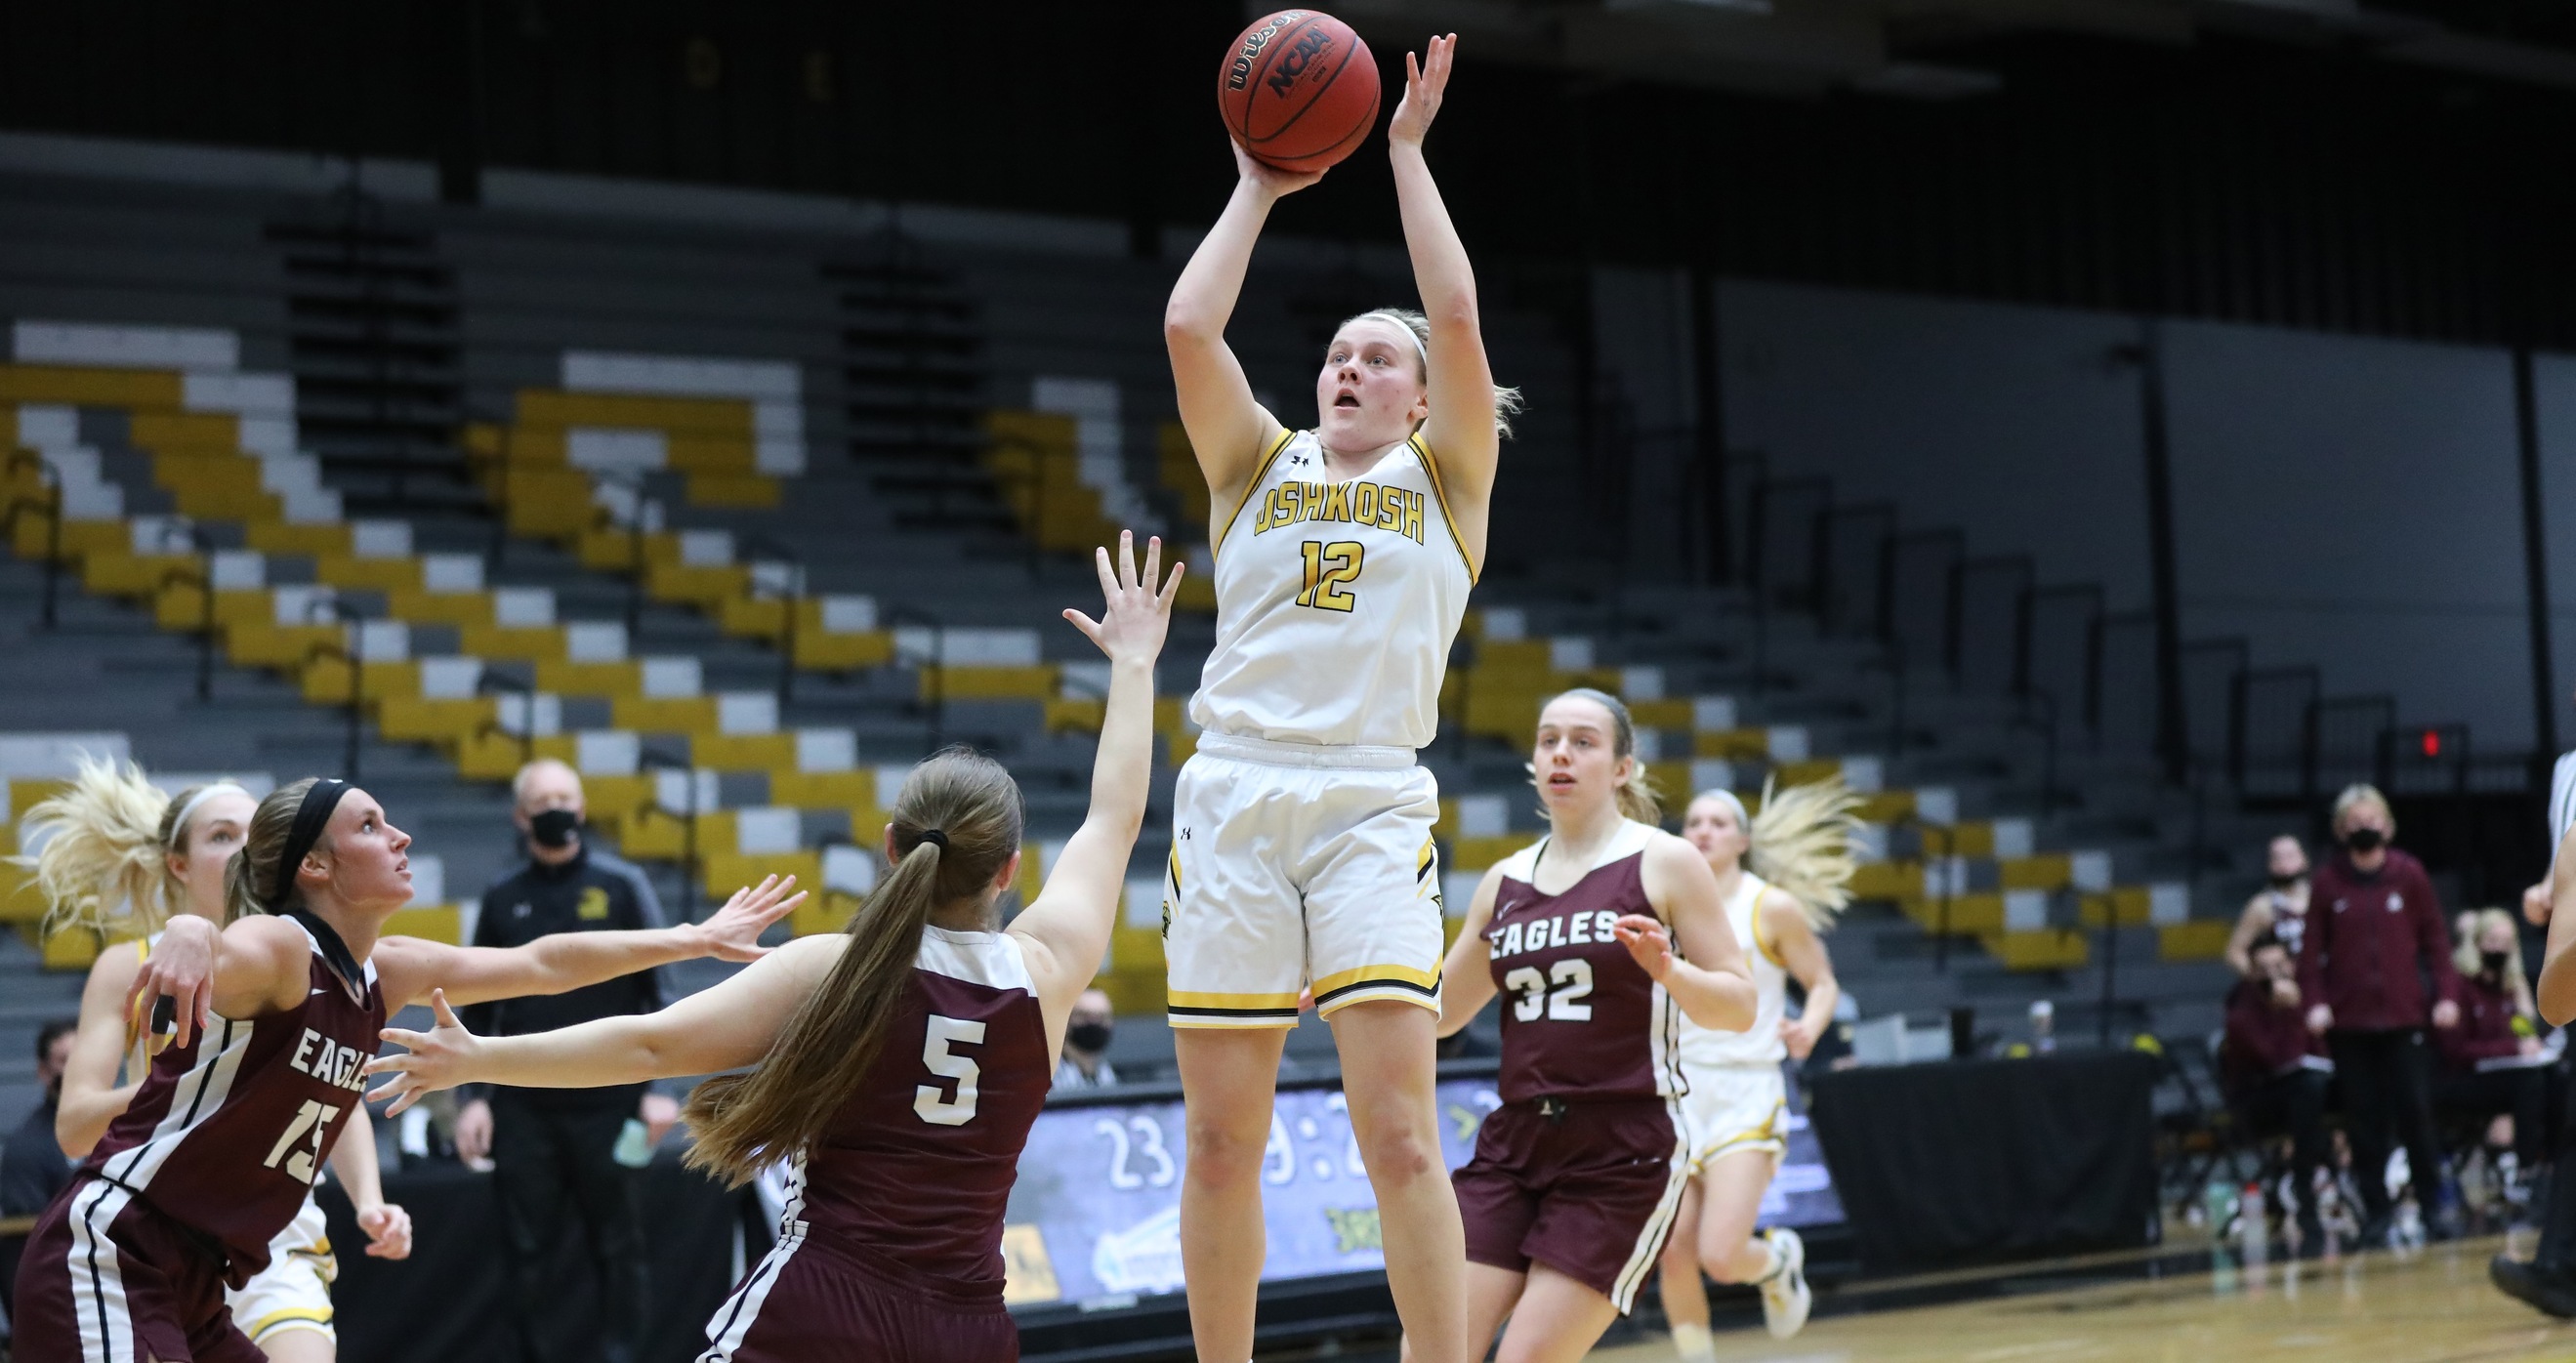 Leah Porath scored a career-high 35 points by shooting 13 of 19 from the field, including 3-for-3 from 3-point range, and 6-for-8 at the free throw line.